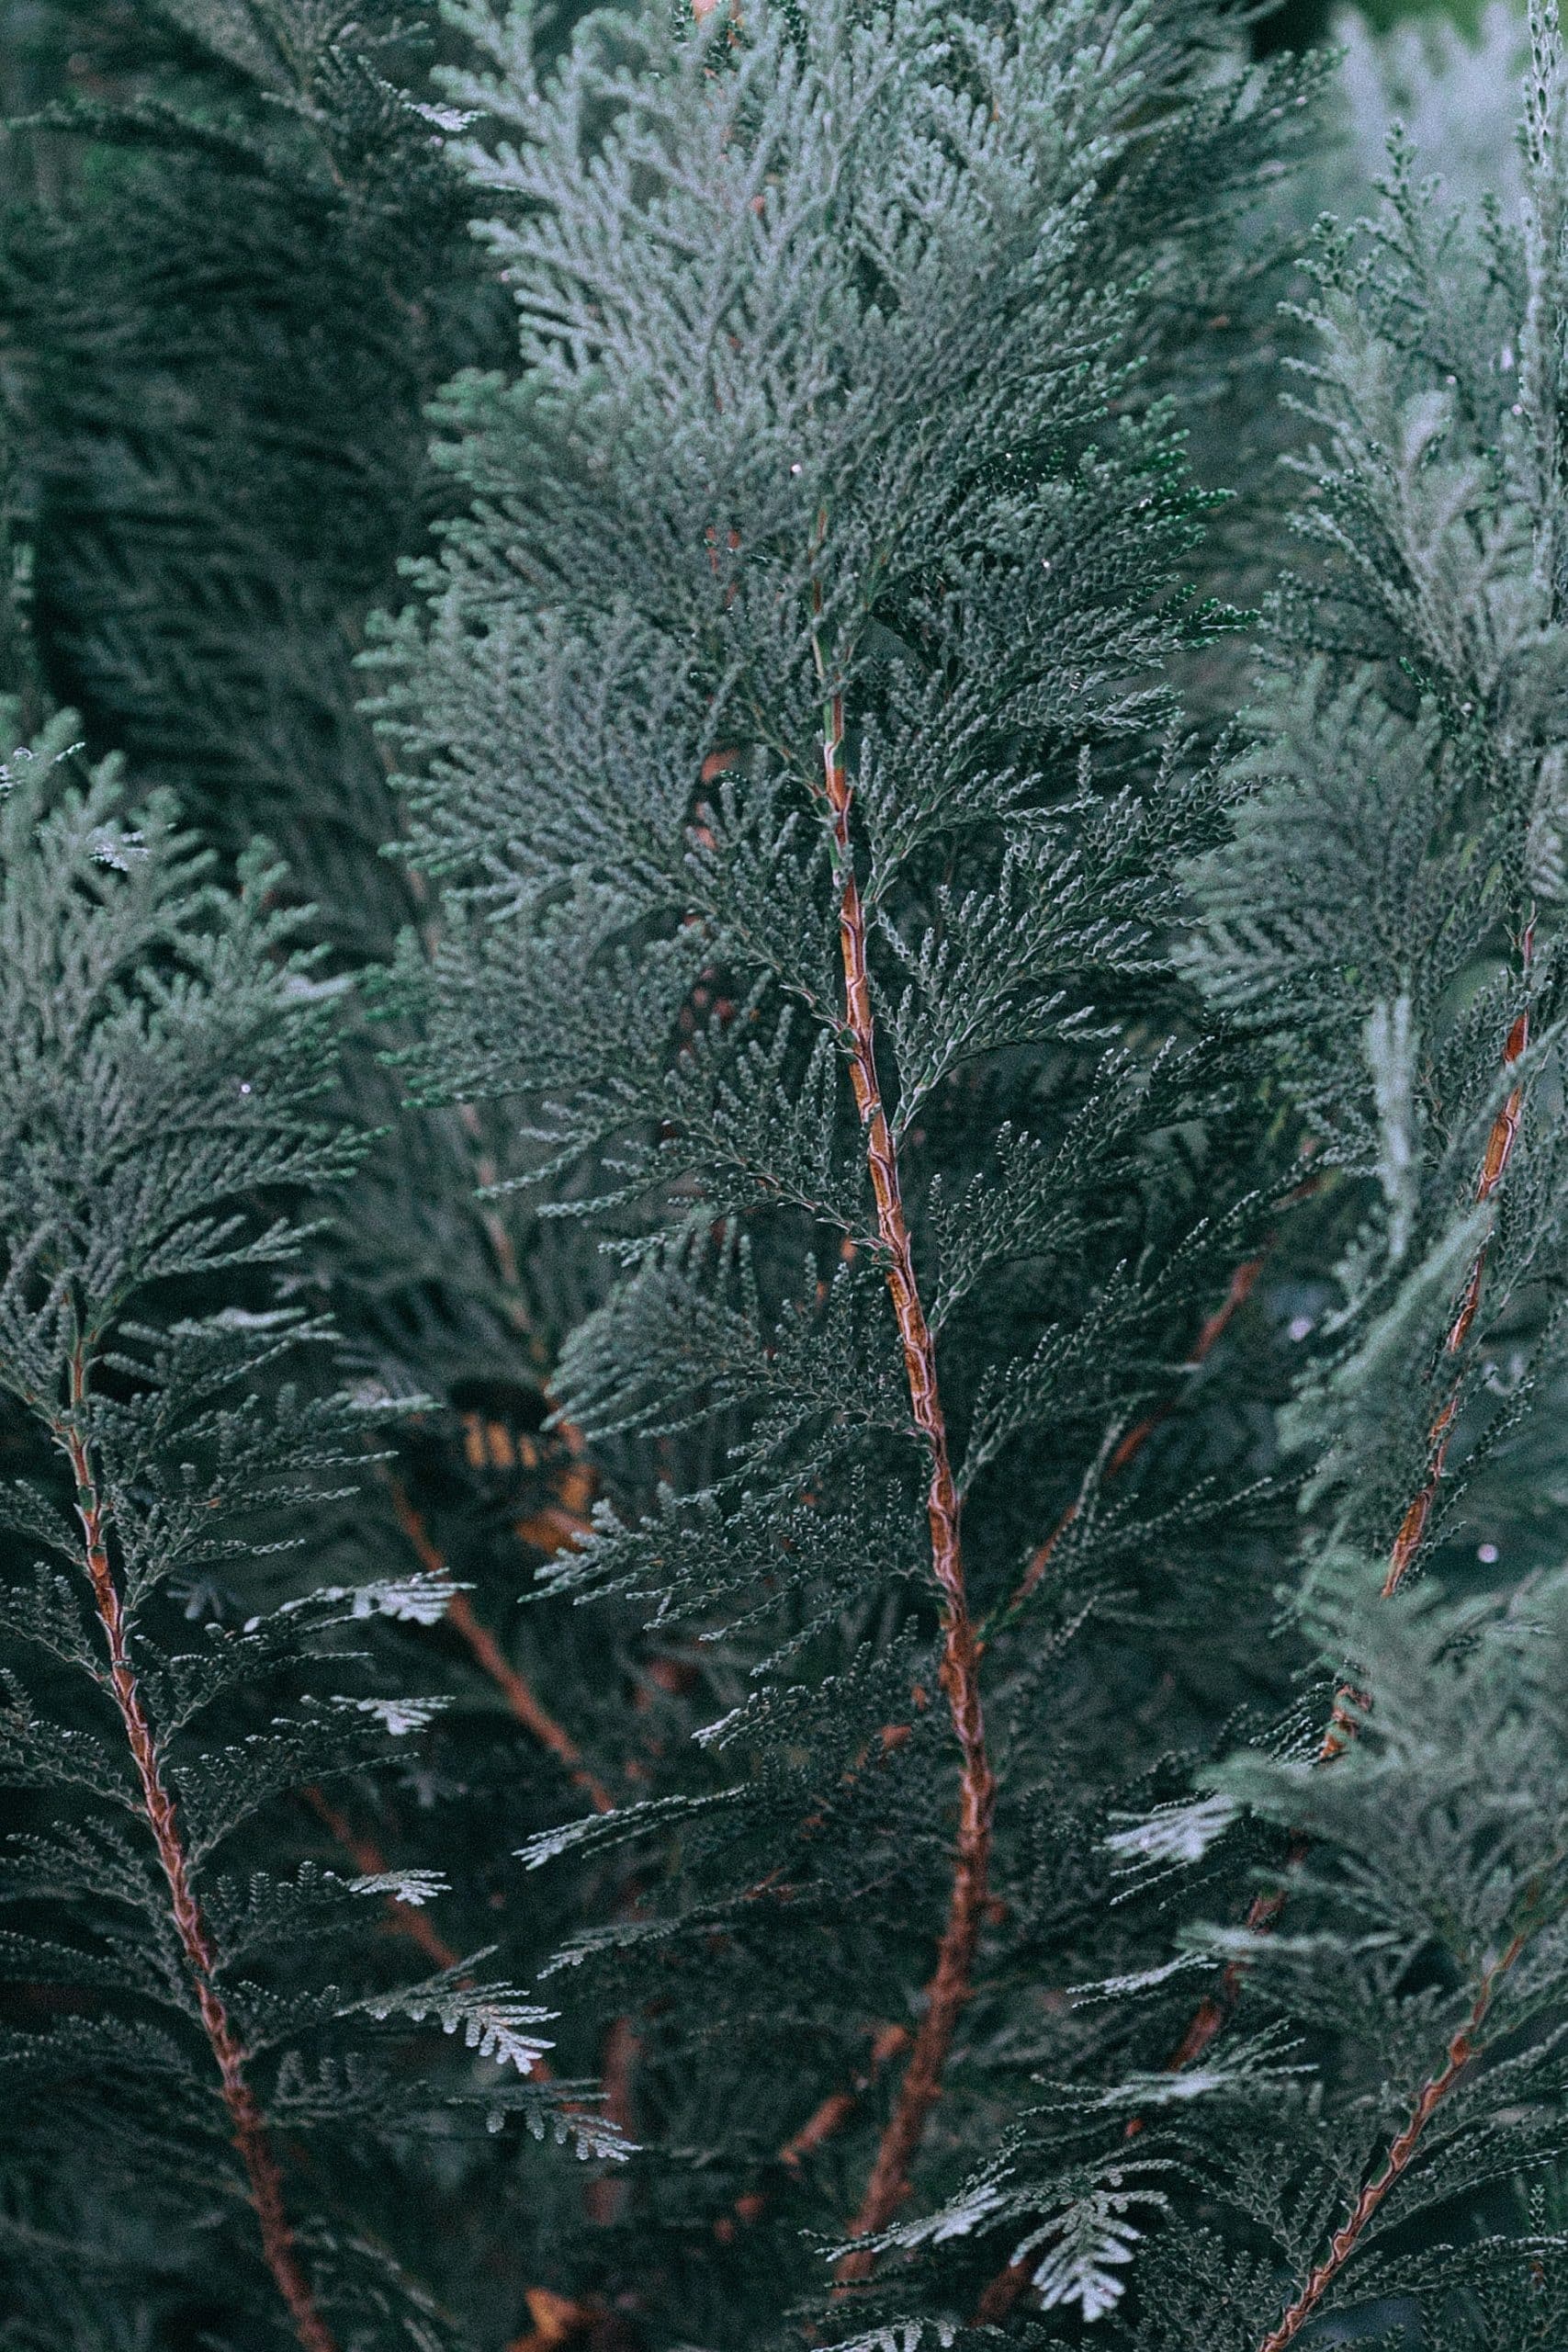 A close up of pine tree branches